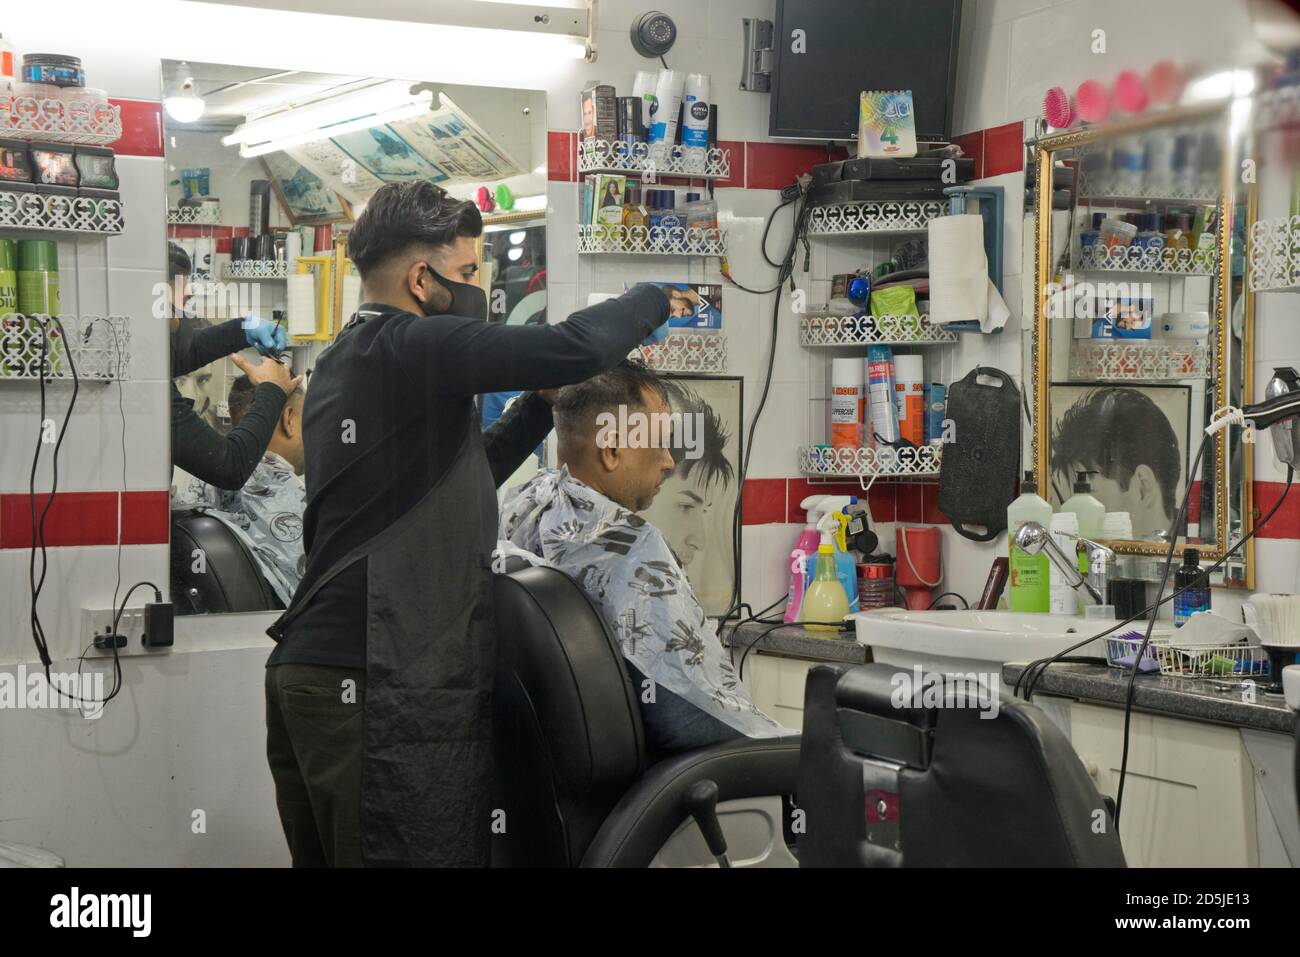 Page 2 - London Barber High Resolution Stock Photography and Images - Alamy